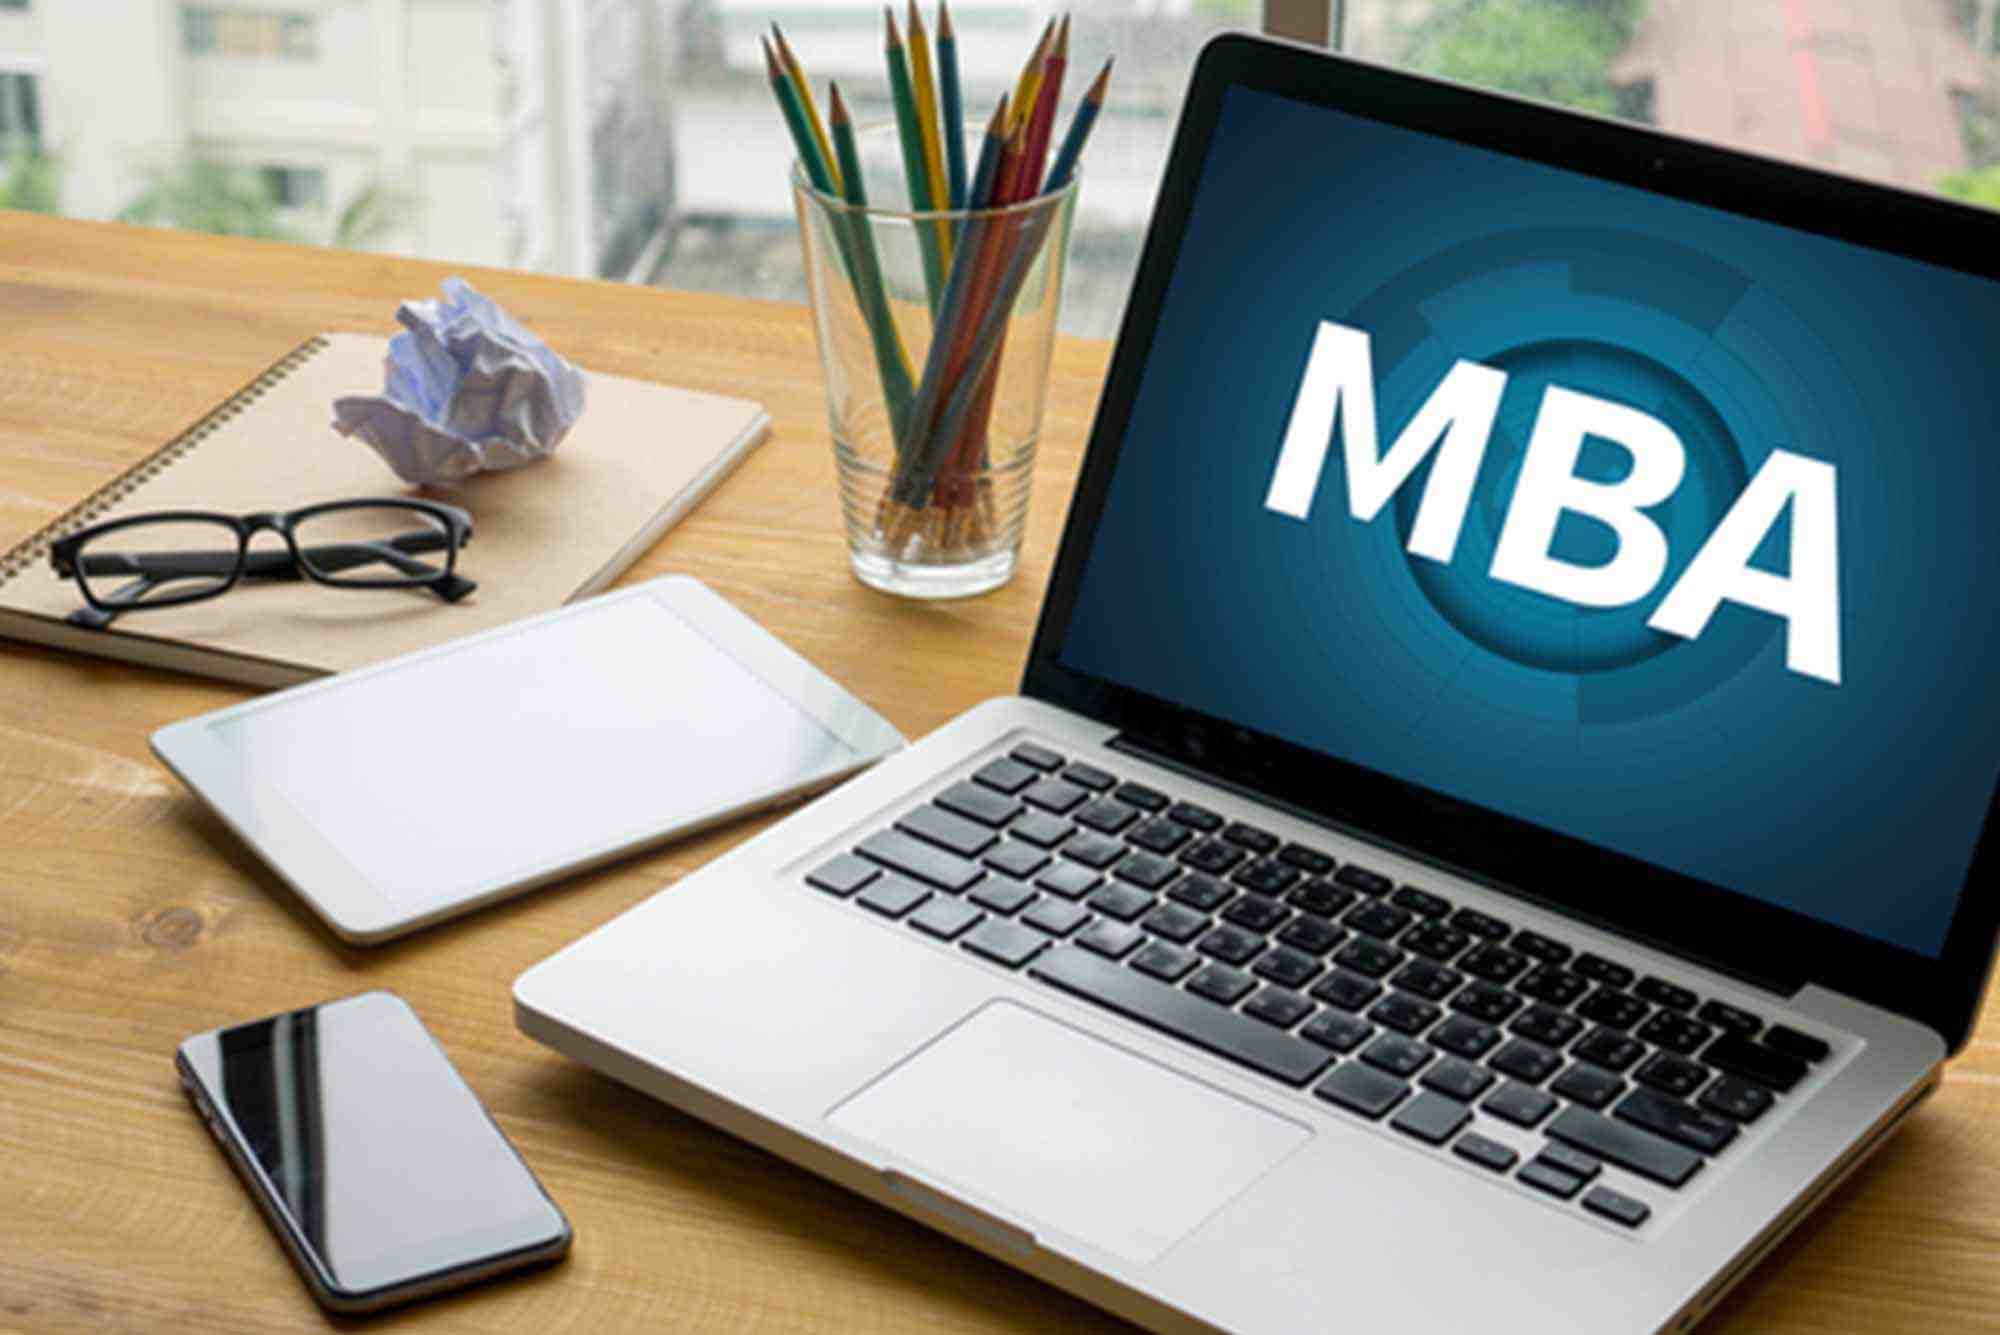 The international MBA programme is available both in the online and offline mode.    Source: Shutterstock